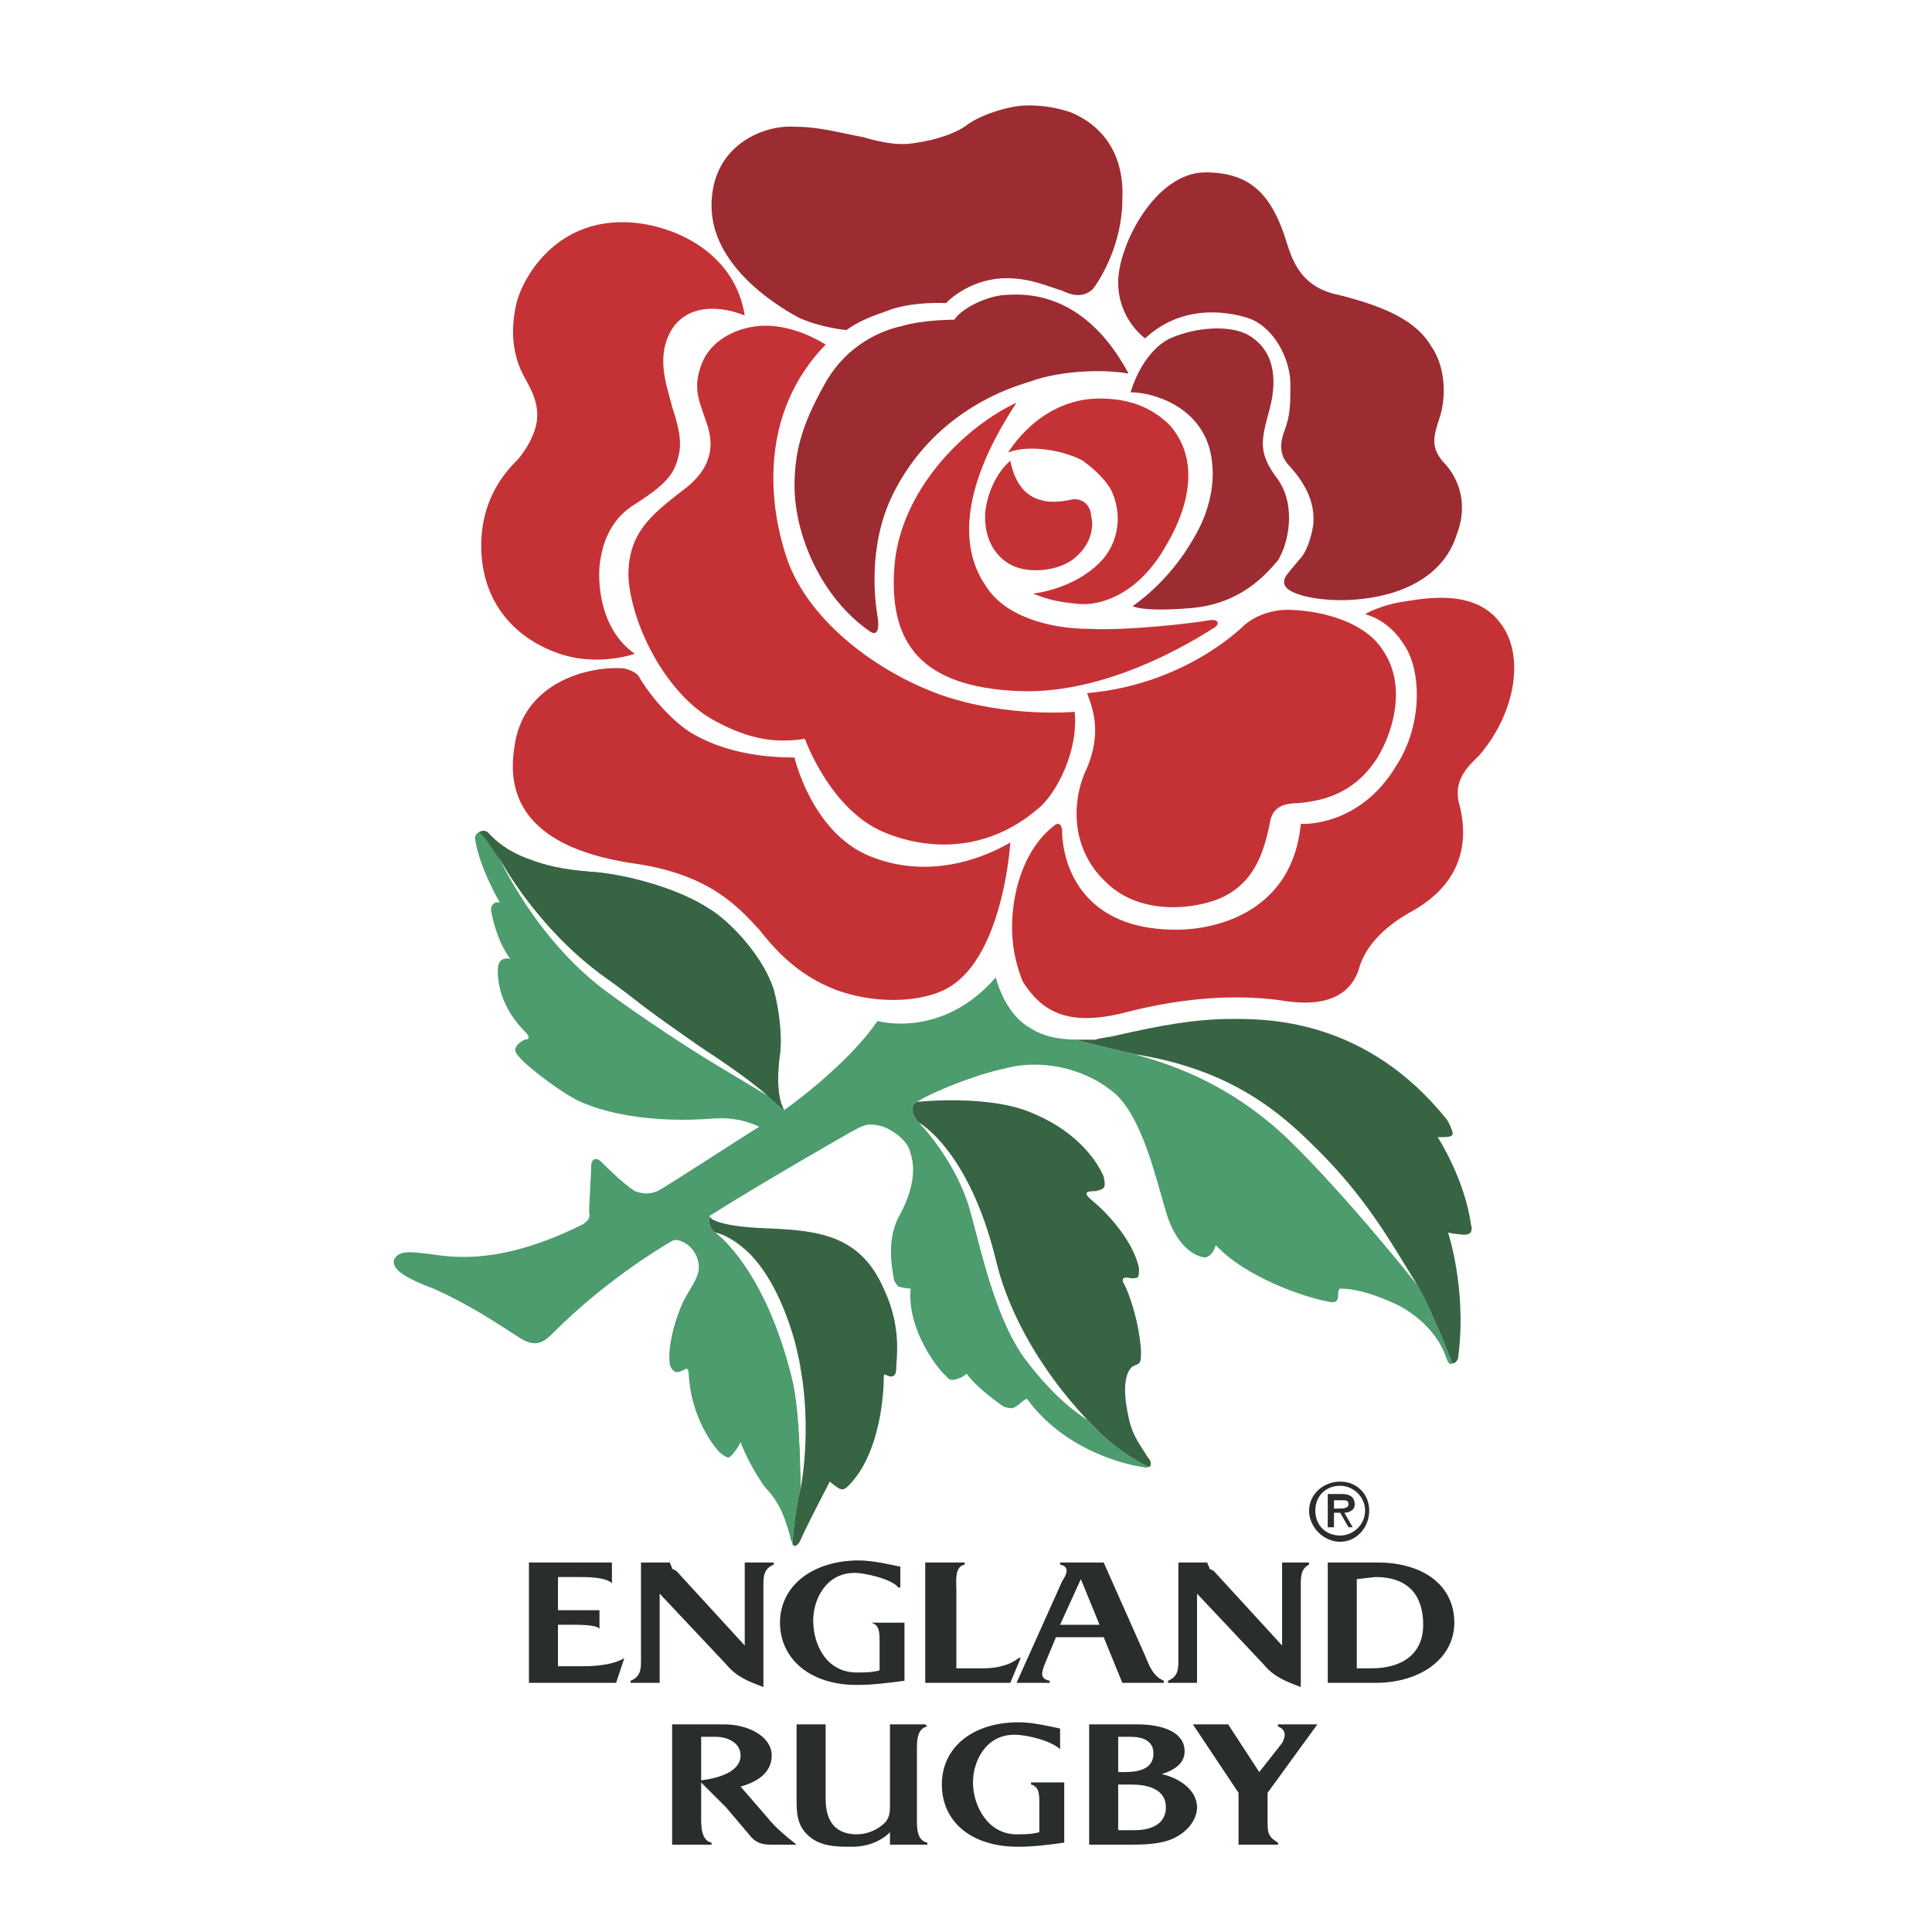 England National Rugby League Team logo colors